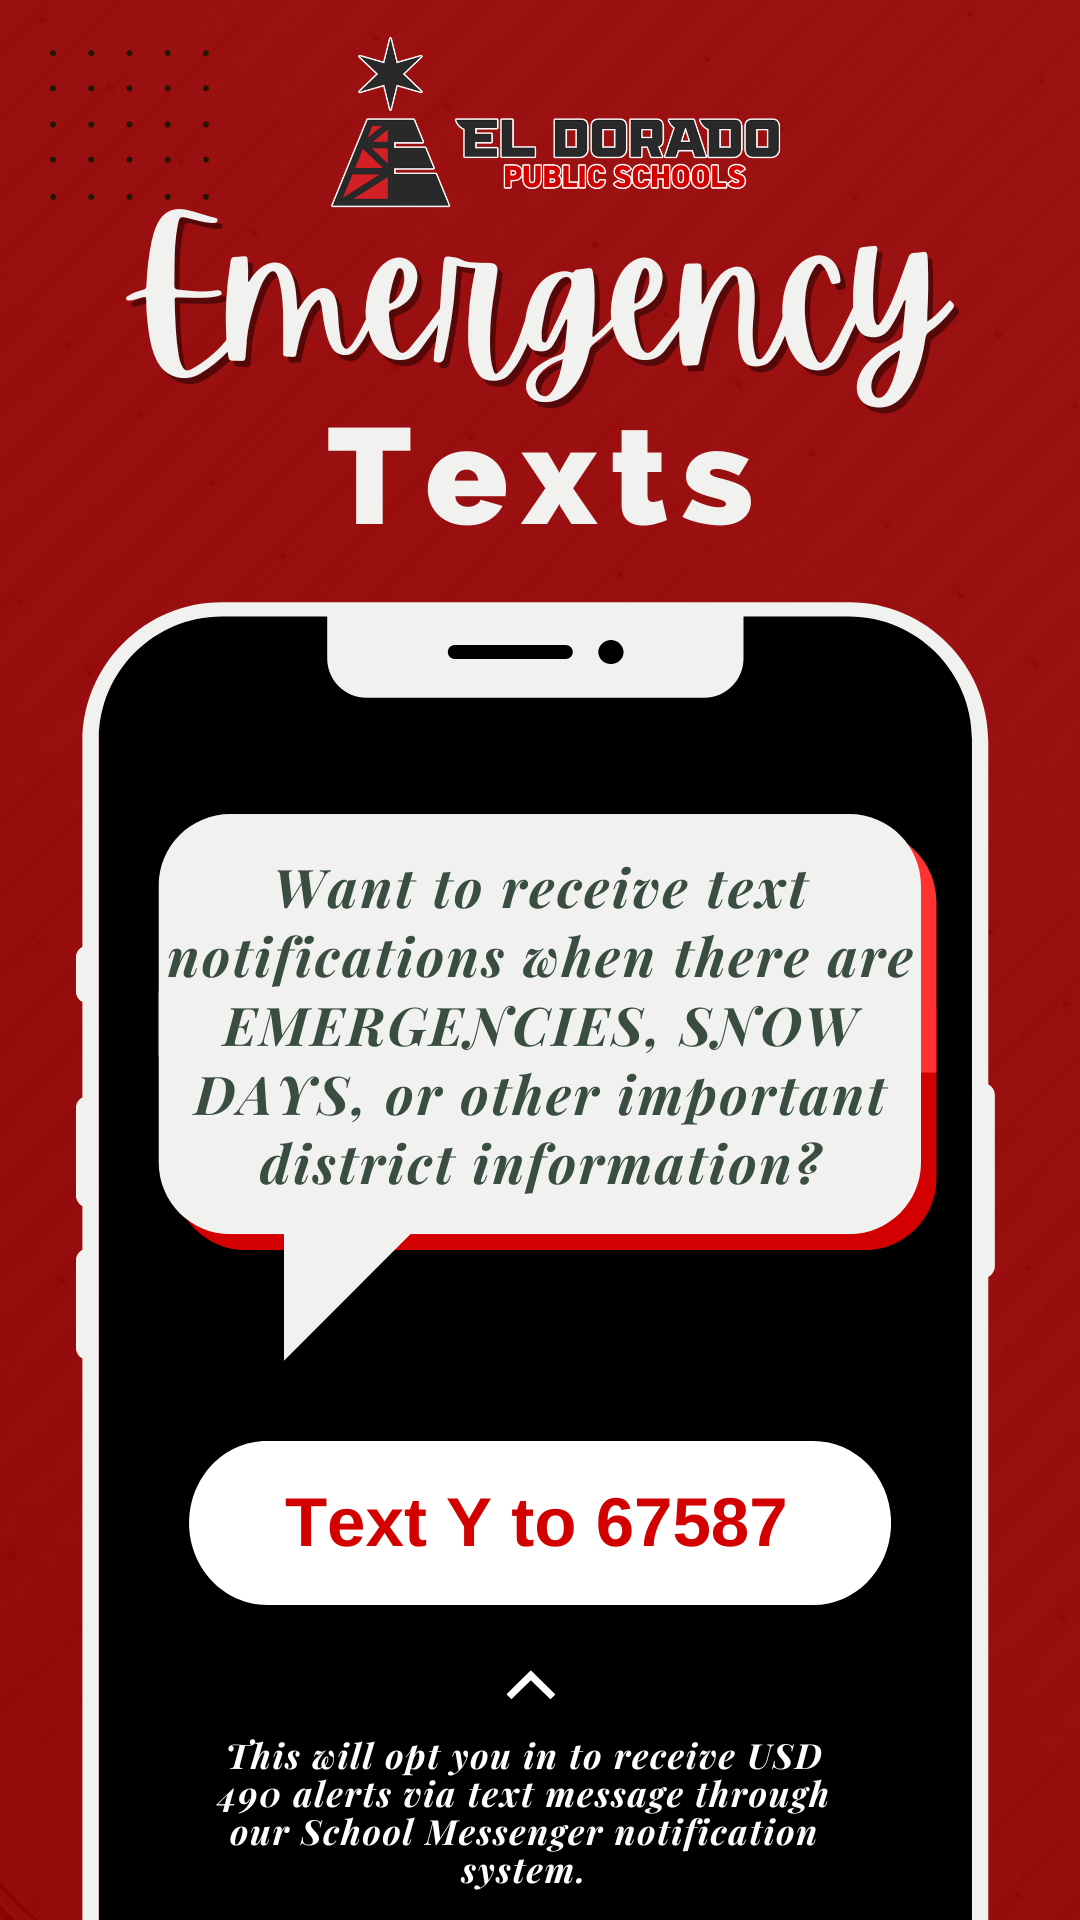 Text "Y" to 67587 to opt-in to receive text alerts